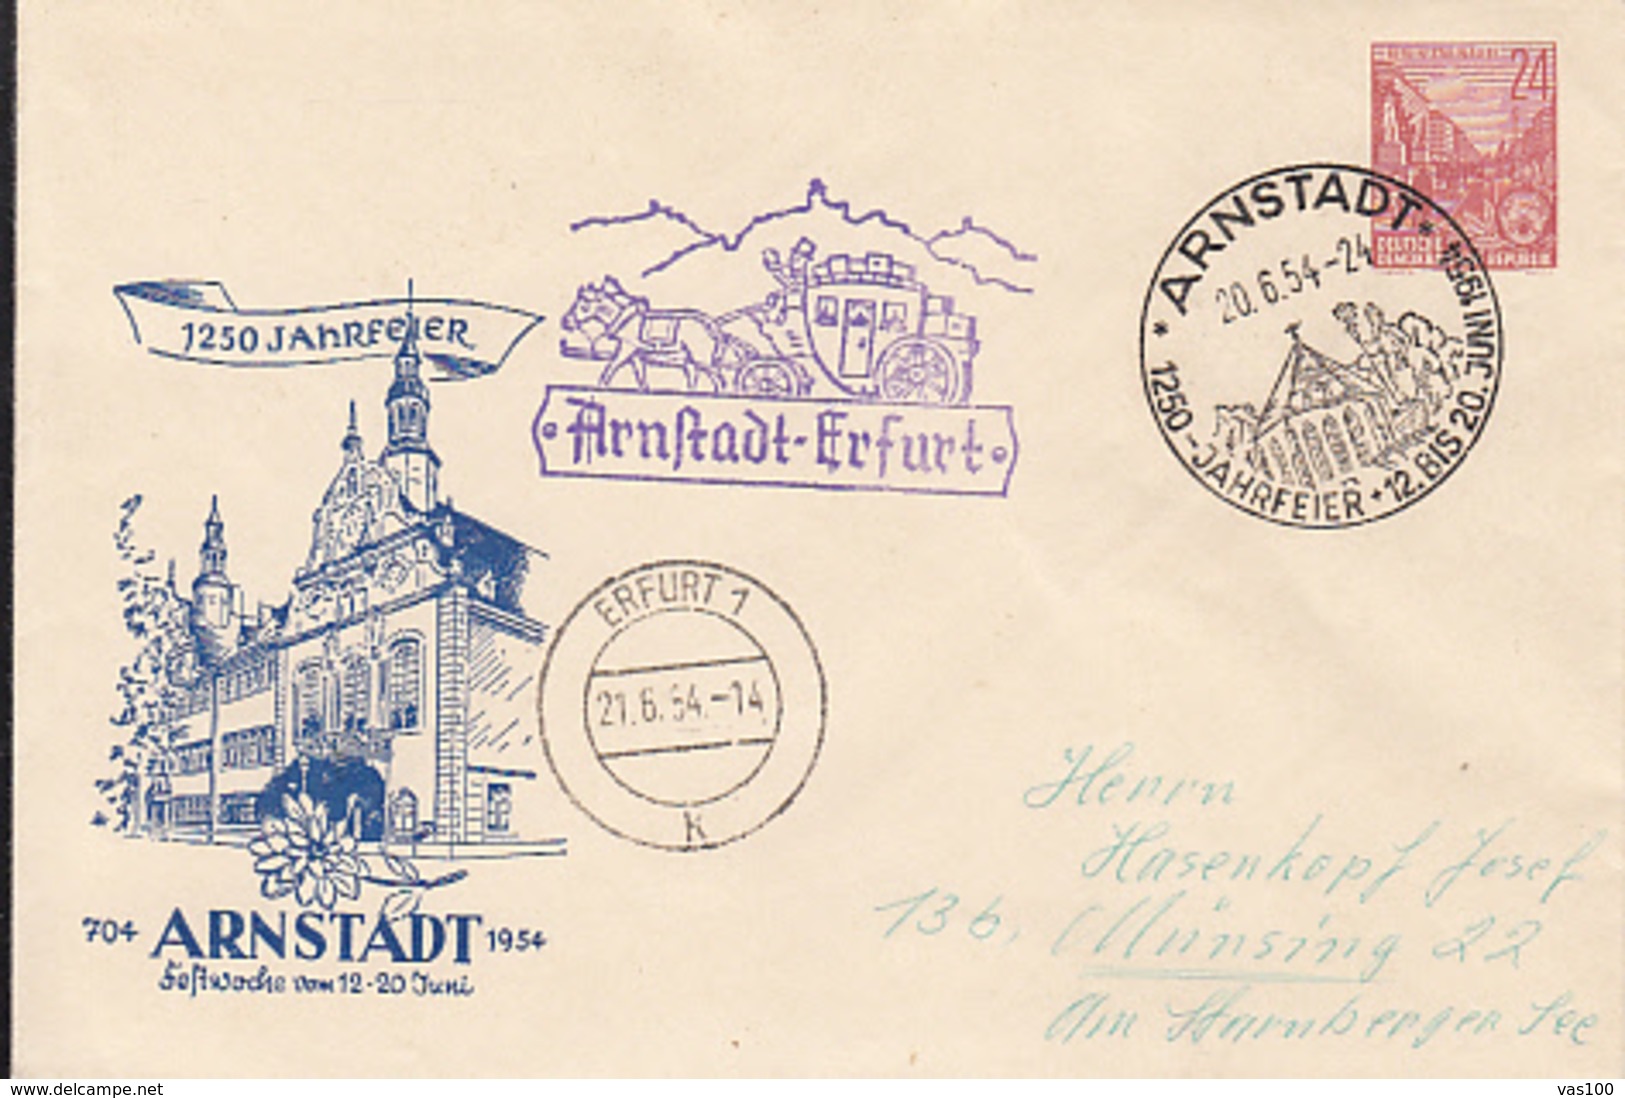 ARNSTADT TOWN ANNIVERSARY, 5 YEAR PLANS, COVER STATIONERY, ENTIER POSTAL, 1954, GERMANY - Covers - Used